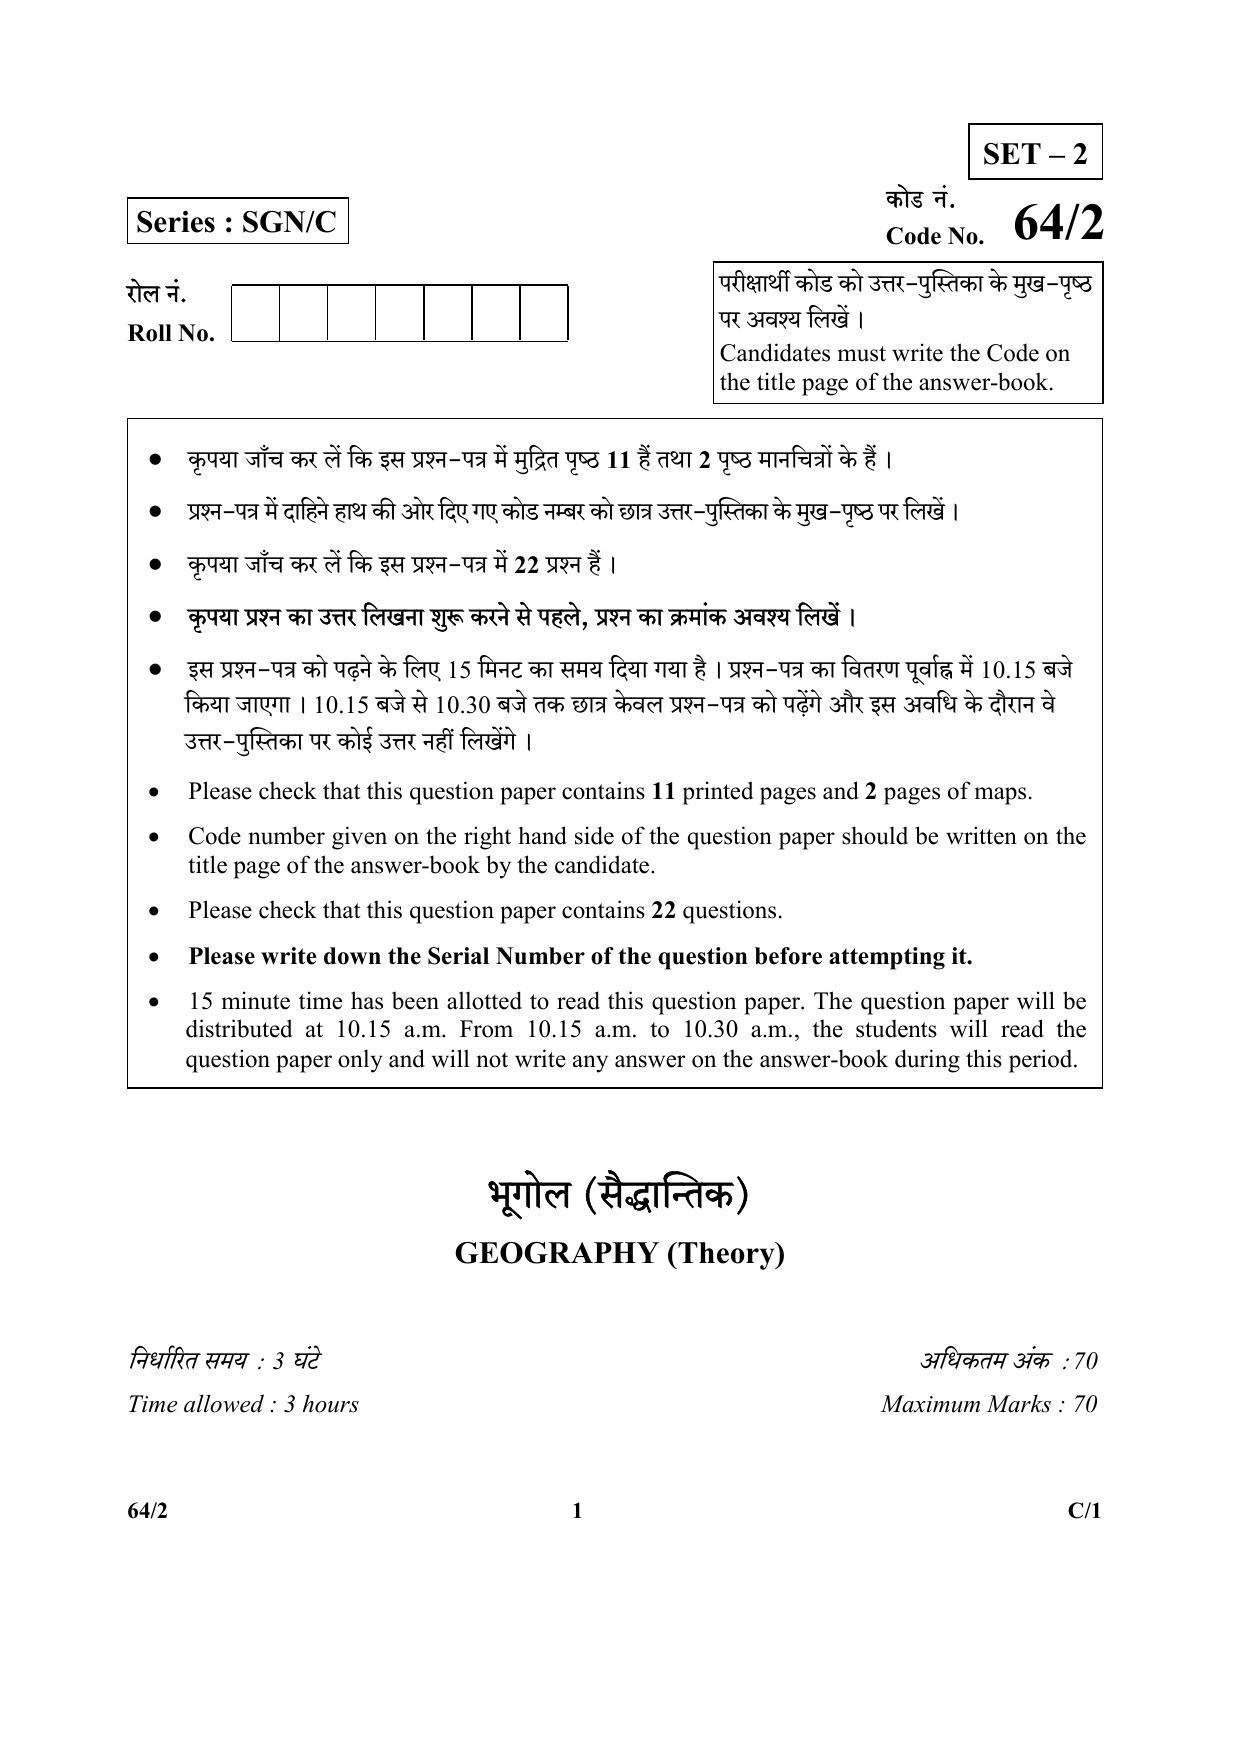 CBSE Class 12 64-2 (Geography) 2018 Compartment Question Paper - Page 1